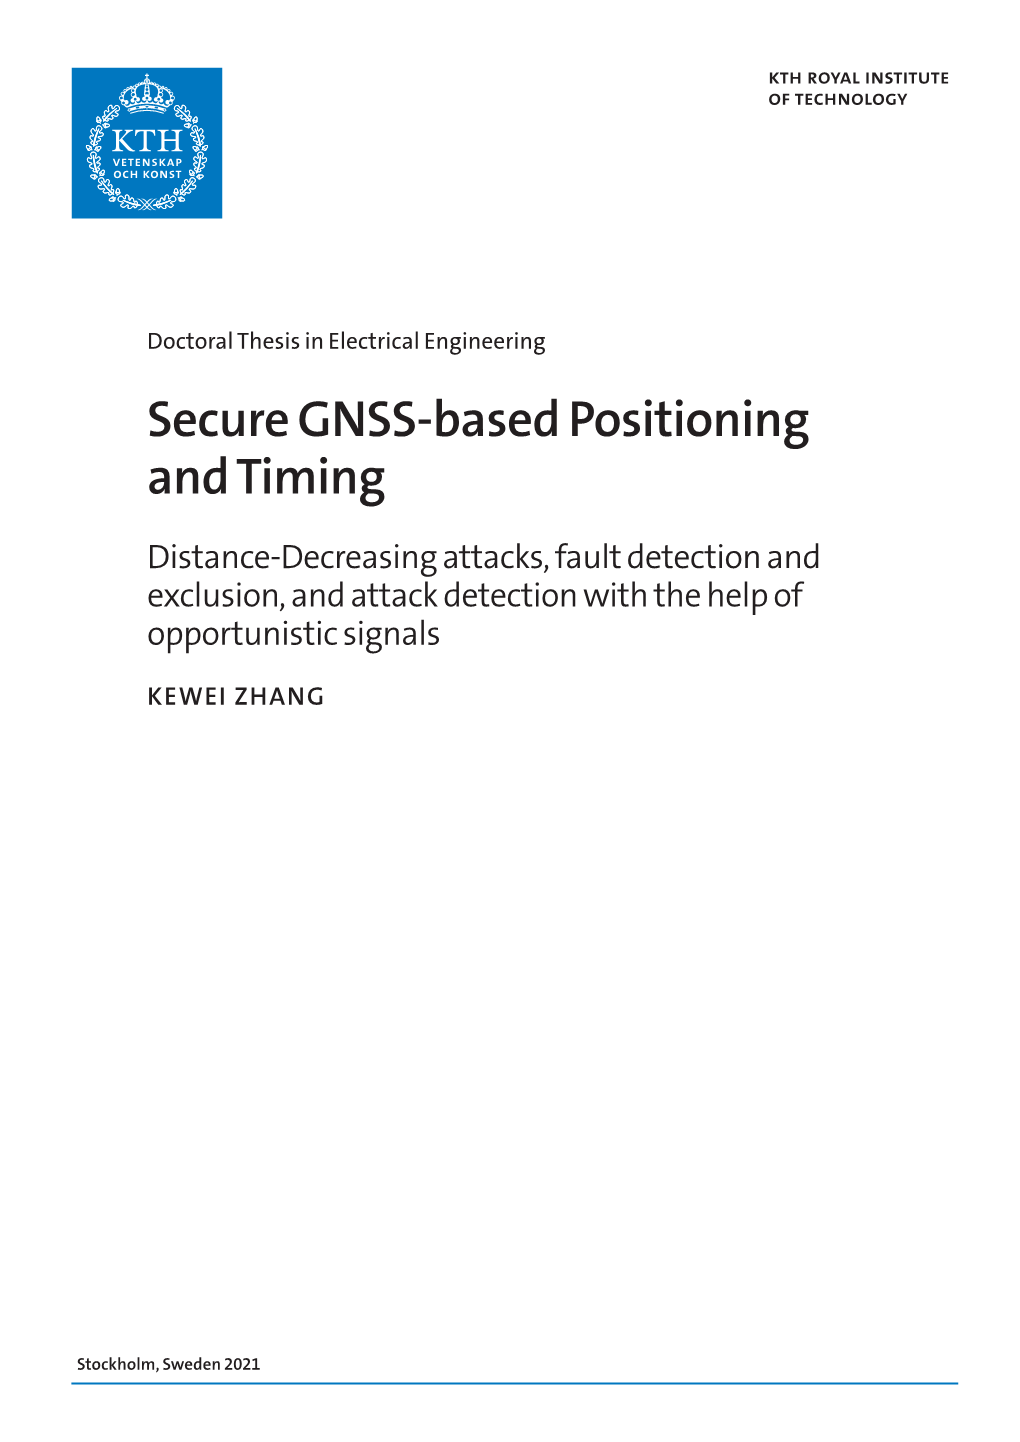 Secure GNSS-Based Positioning and Timing